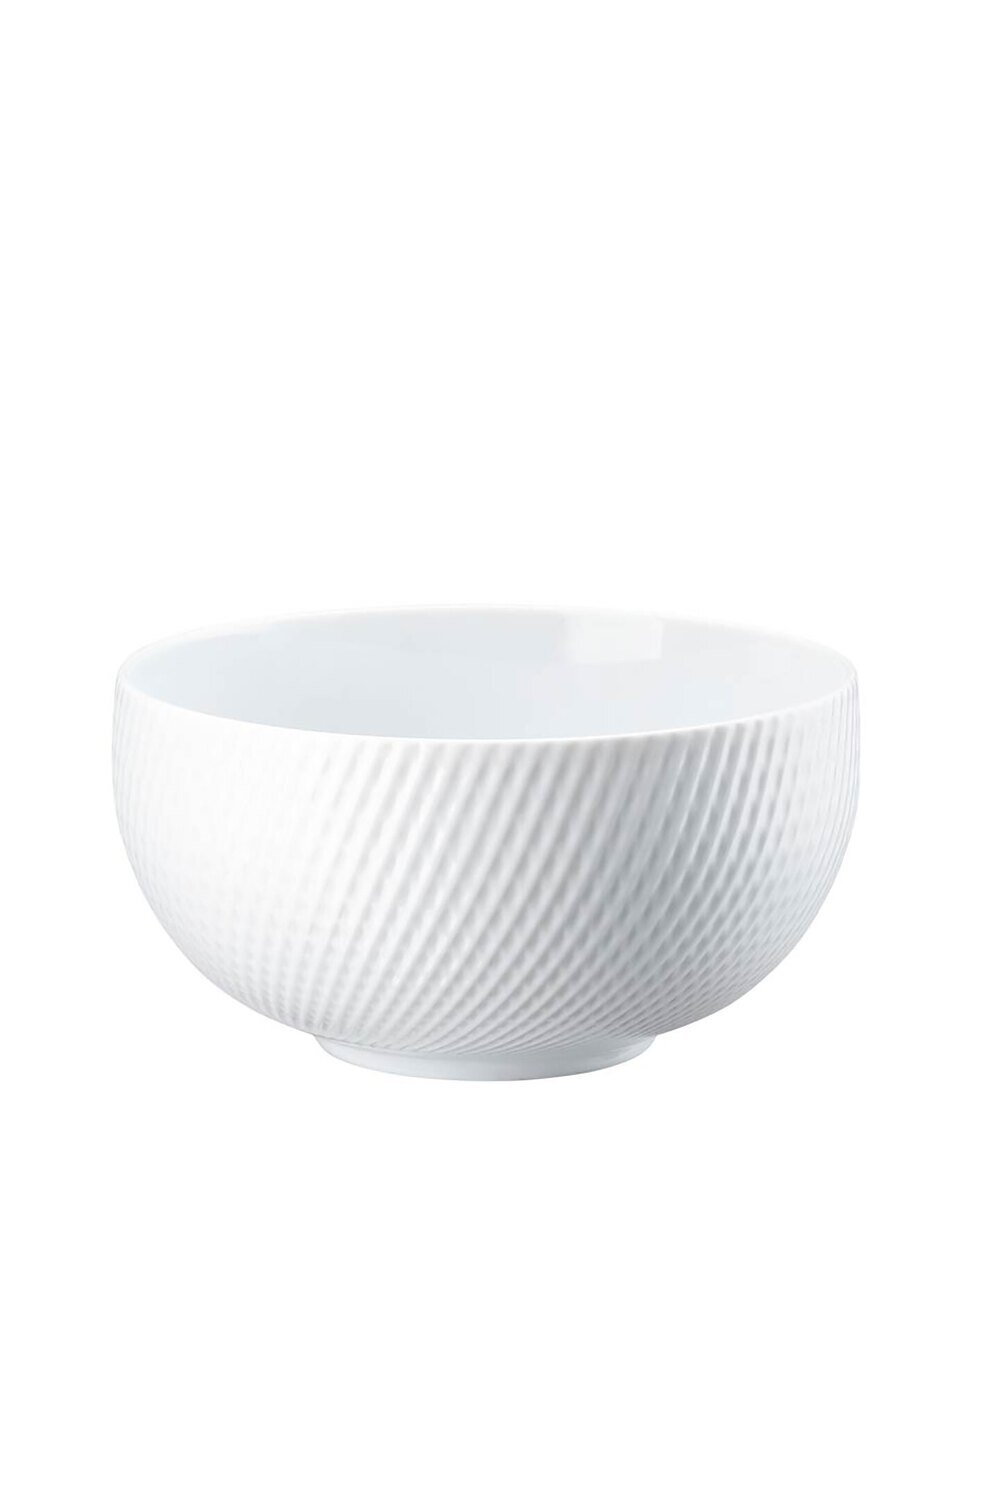 Rosenthal Blend Relief 3 Cereal Bowl 5 1/2 Inch 24 oz